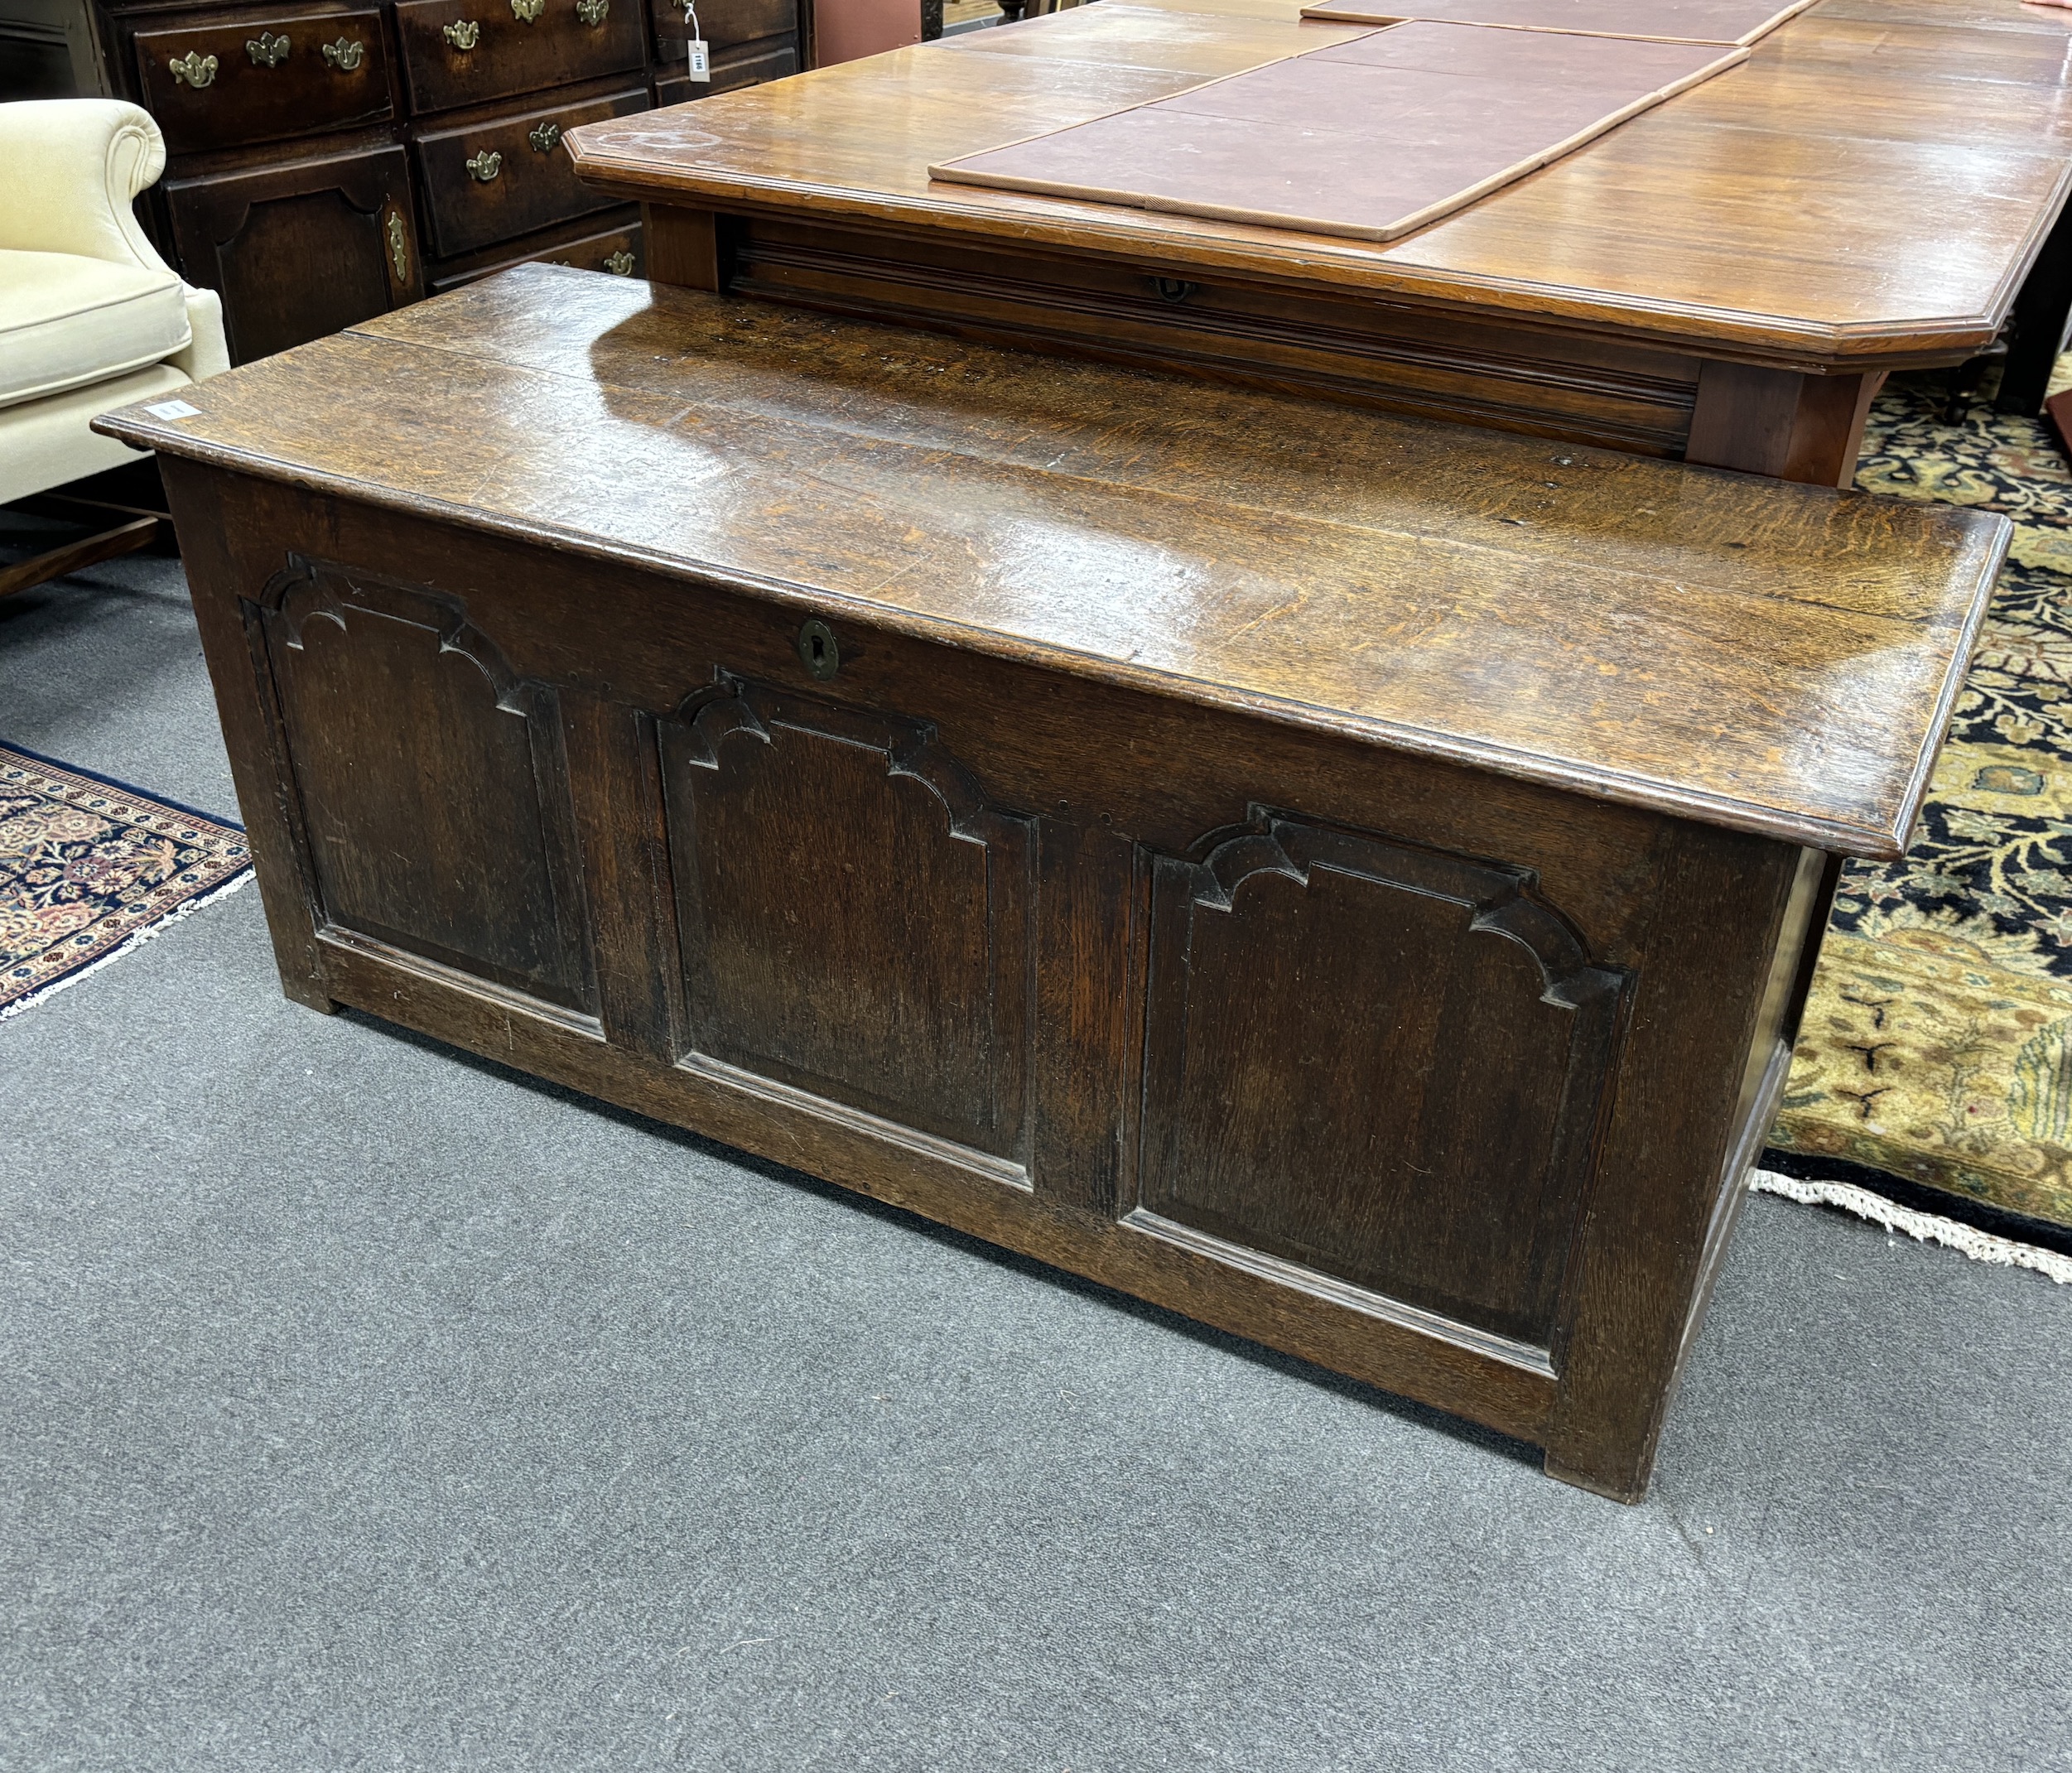 A mid 18th century oak coffer, with a triple arched fielded panelled front, width 146cm, depth 66cm, height 60cm